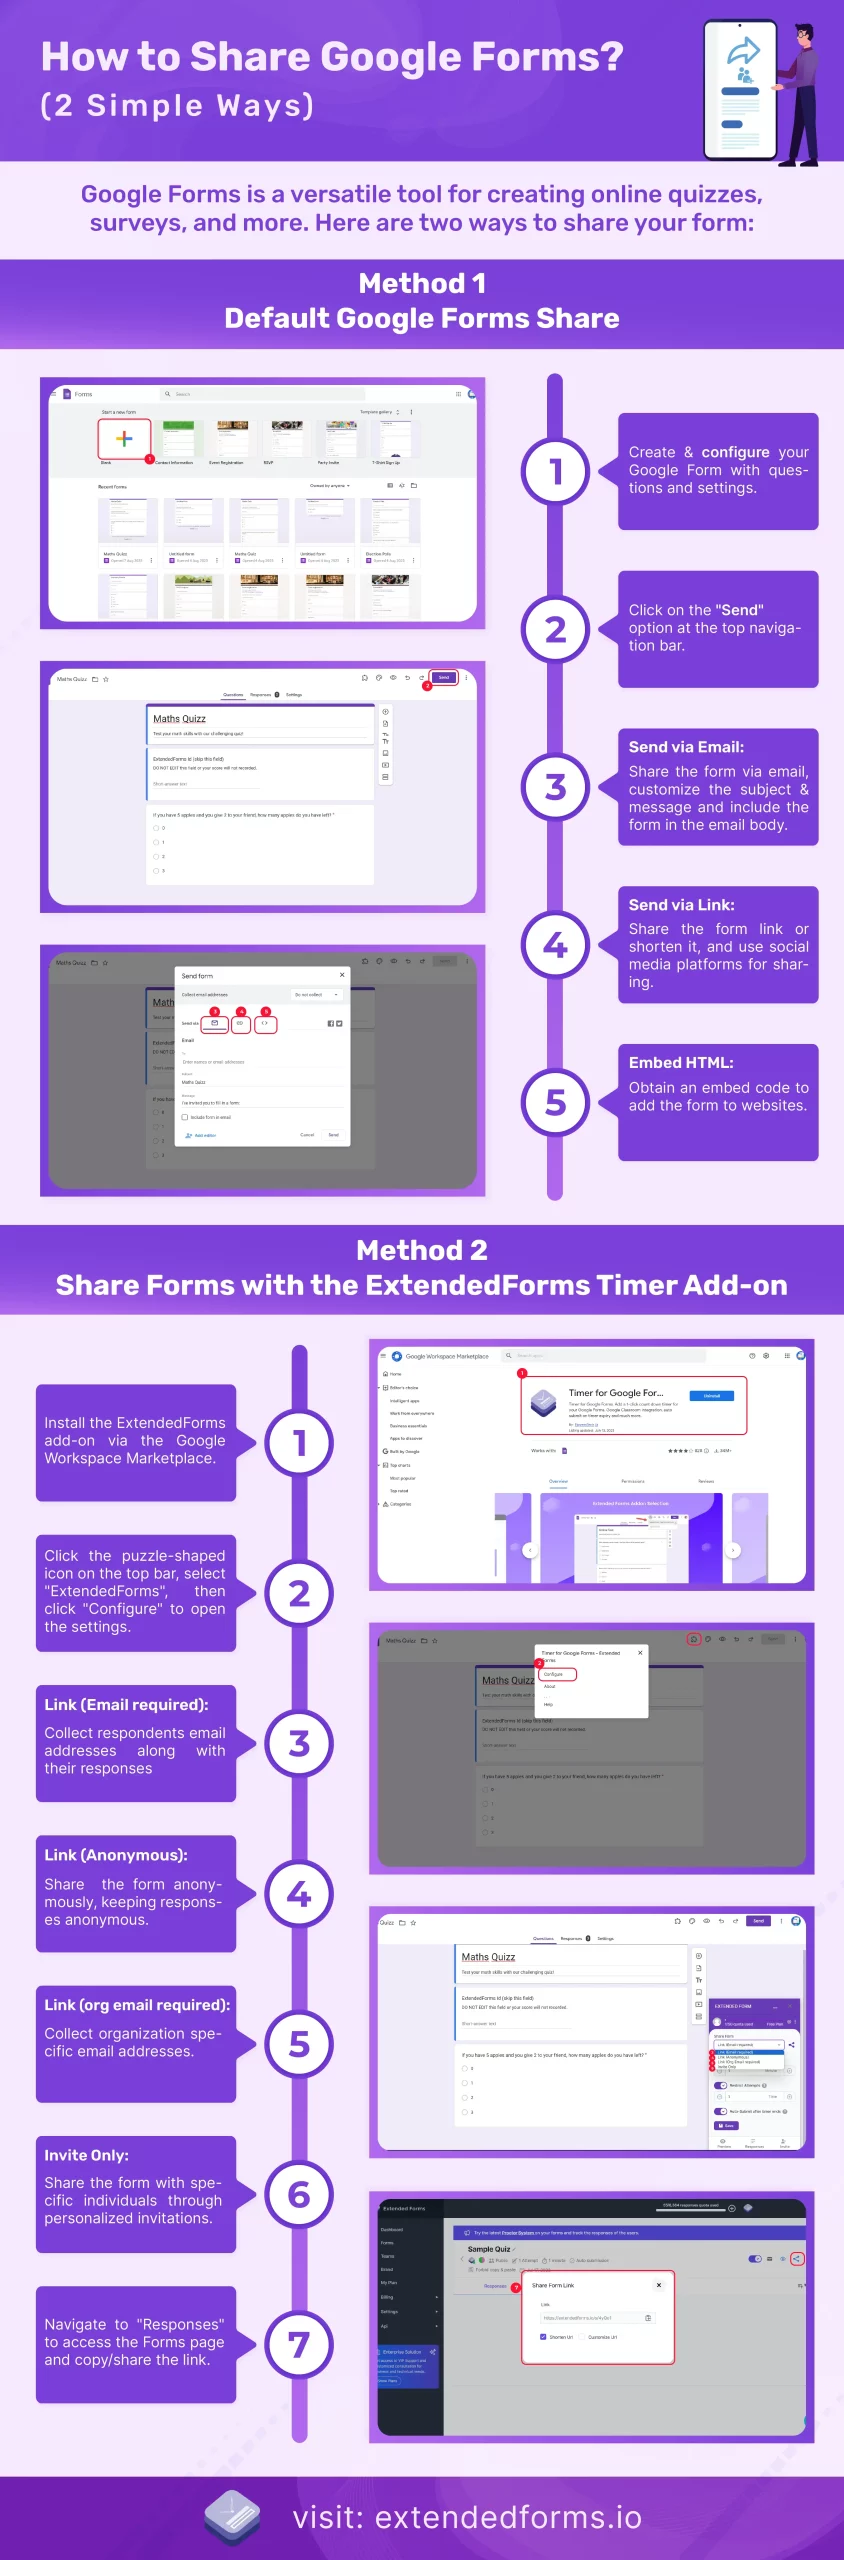 share-google-forms-in-two-ways